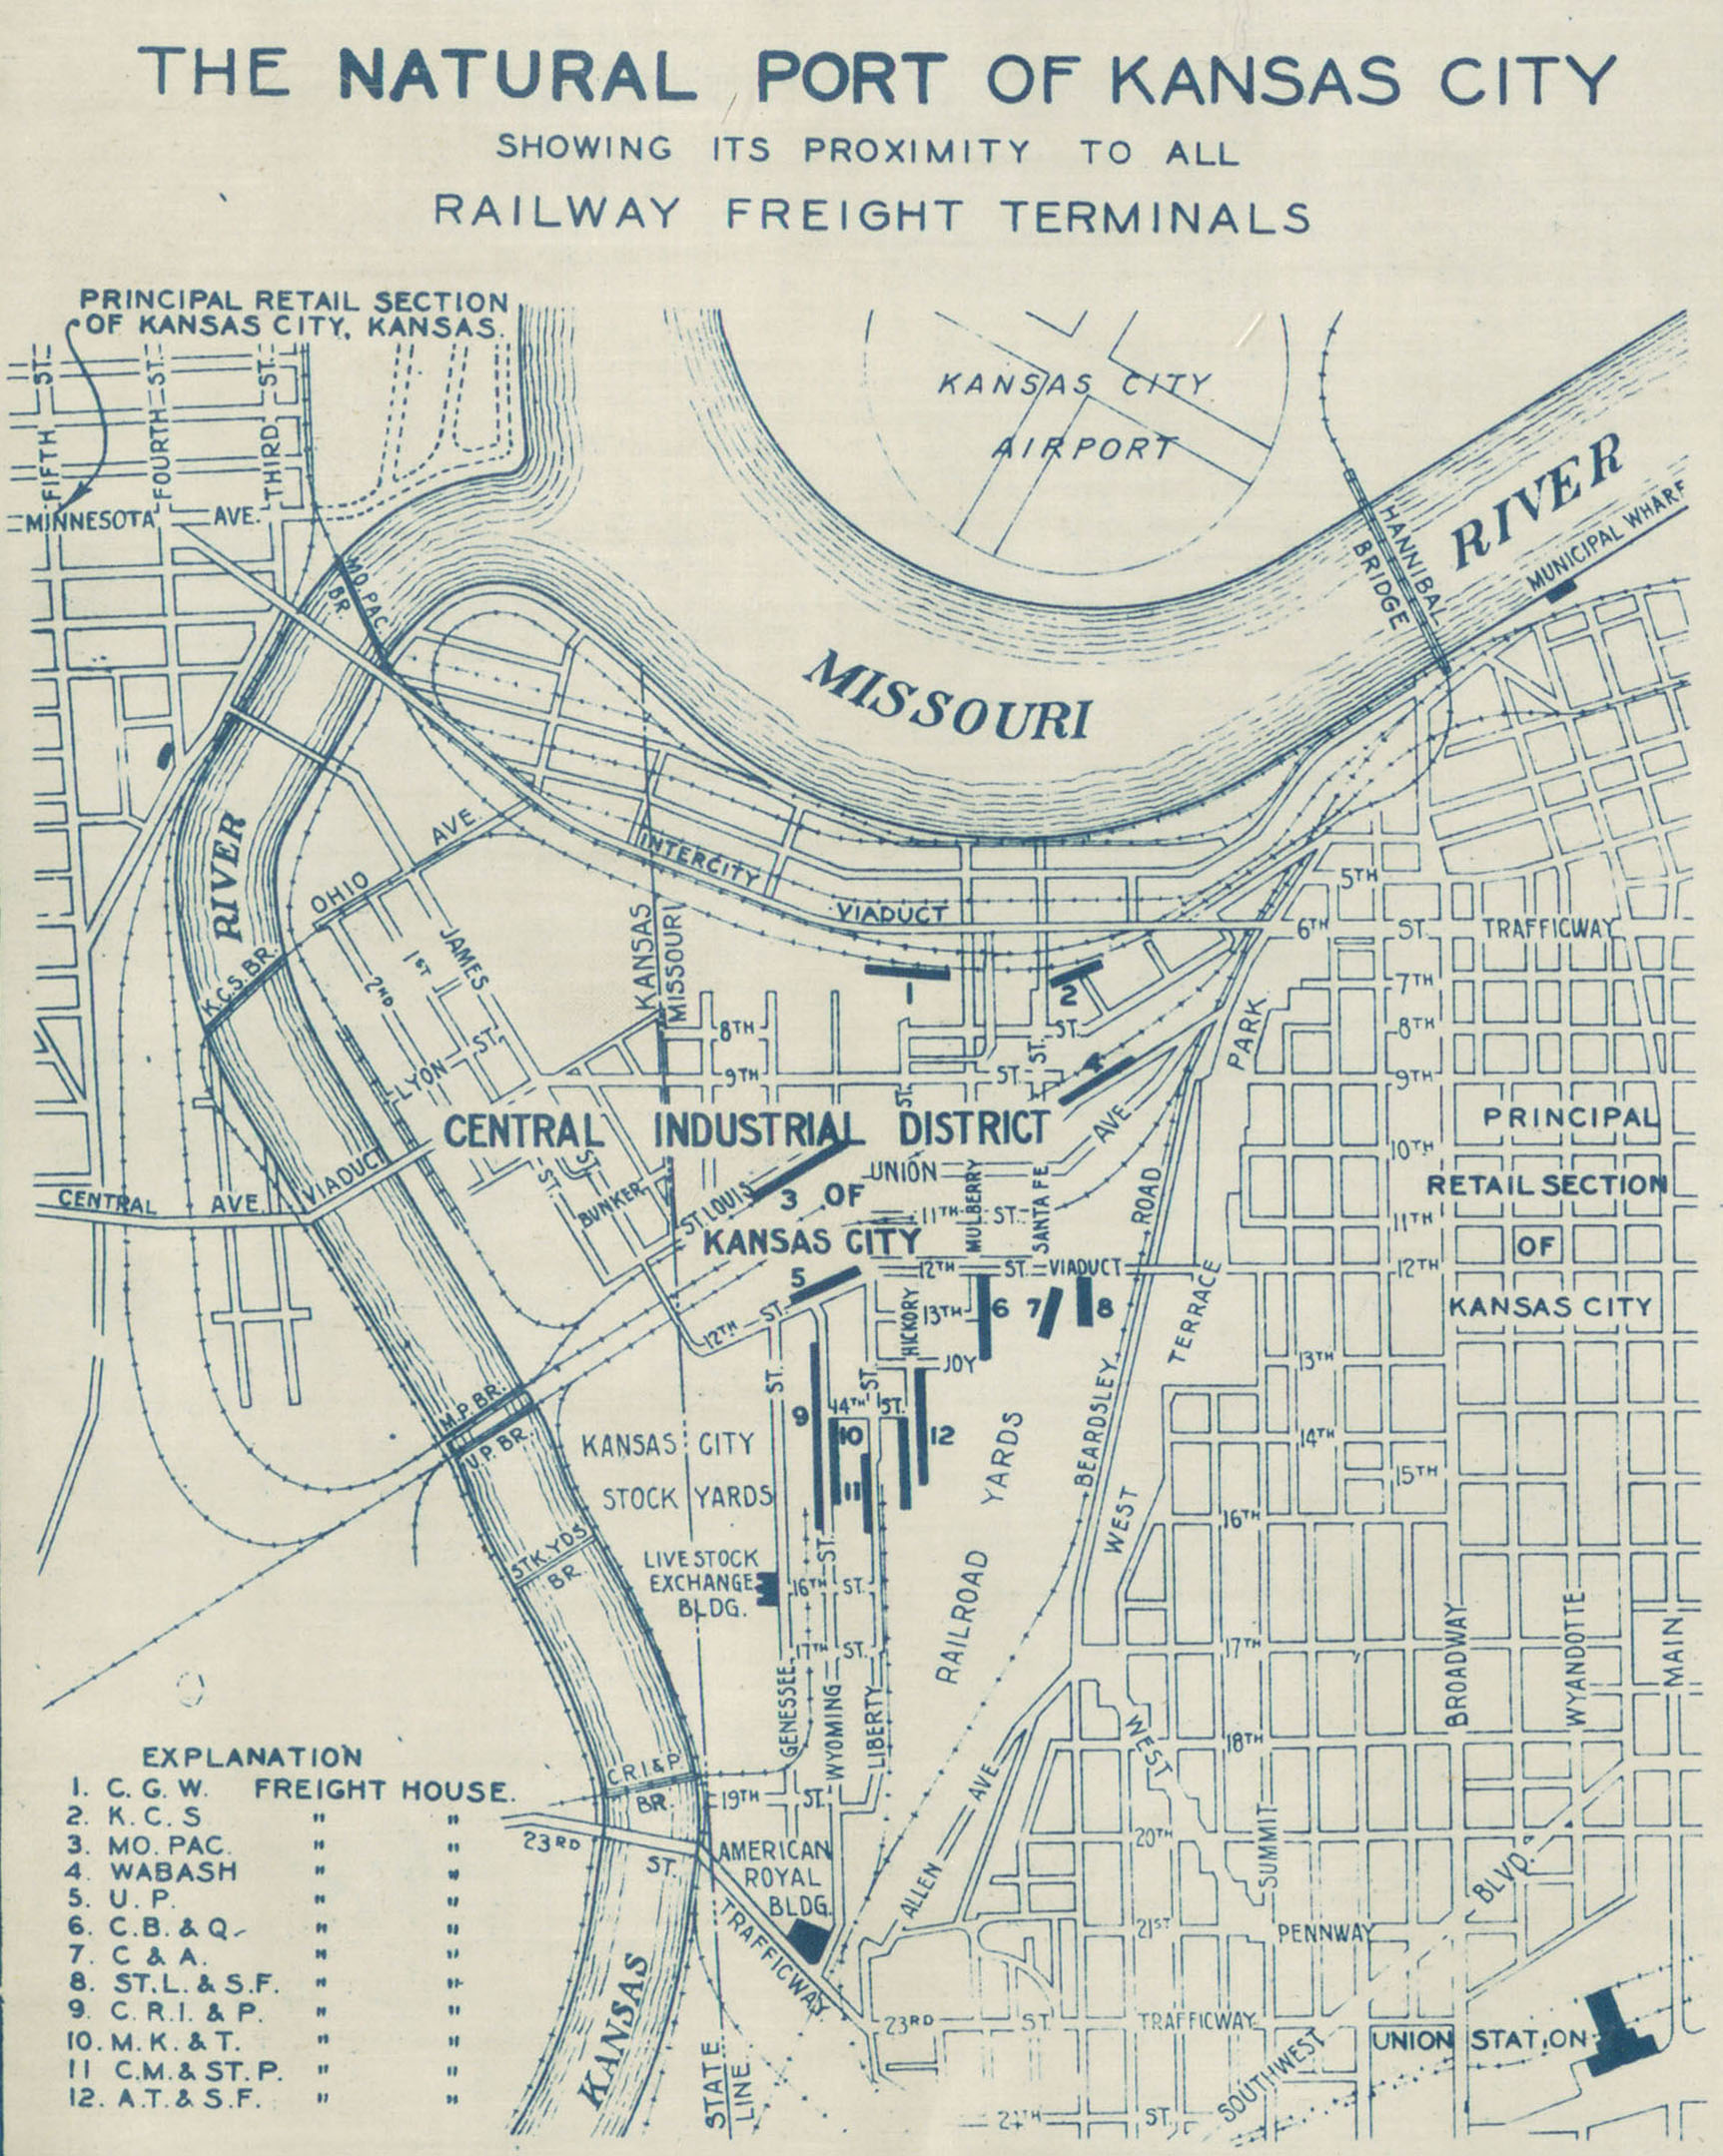 1930 map showing the West Bottoms as a natural port for railway freight.